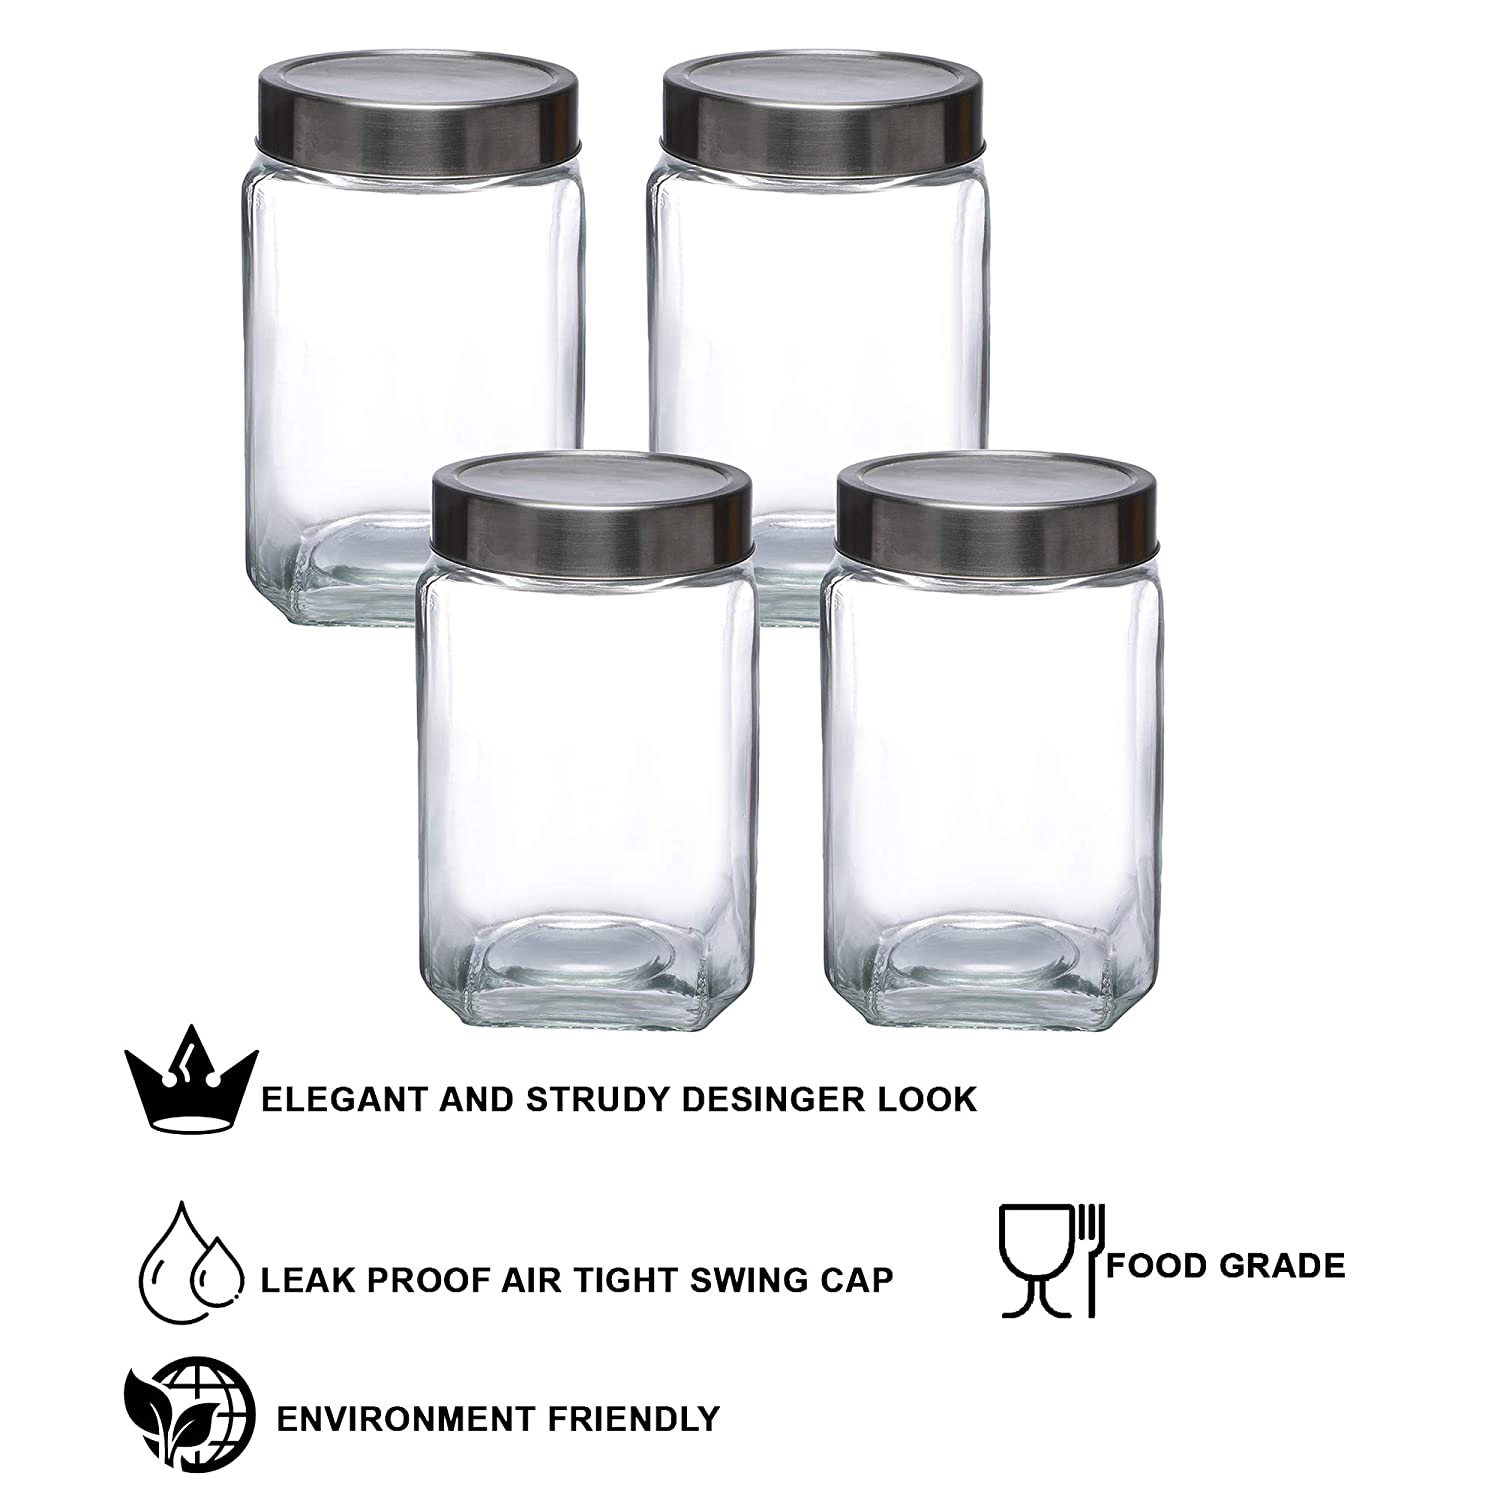 Cutting EDGE Glass Jar Transparent Barni for Kitchen, Aachar Pickle, Dal, Dry Fruits, Masala, Spices, Grocery, Grains Storage Container with Silver See-Through Cap